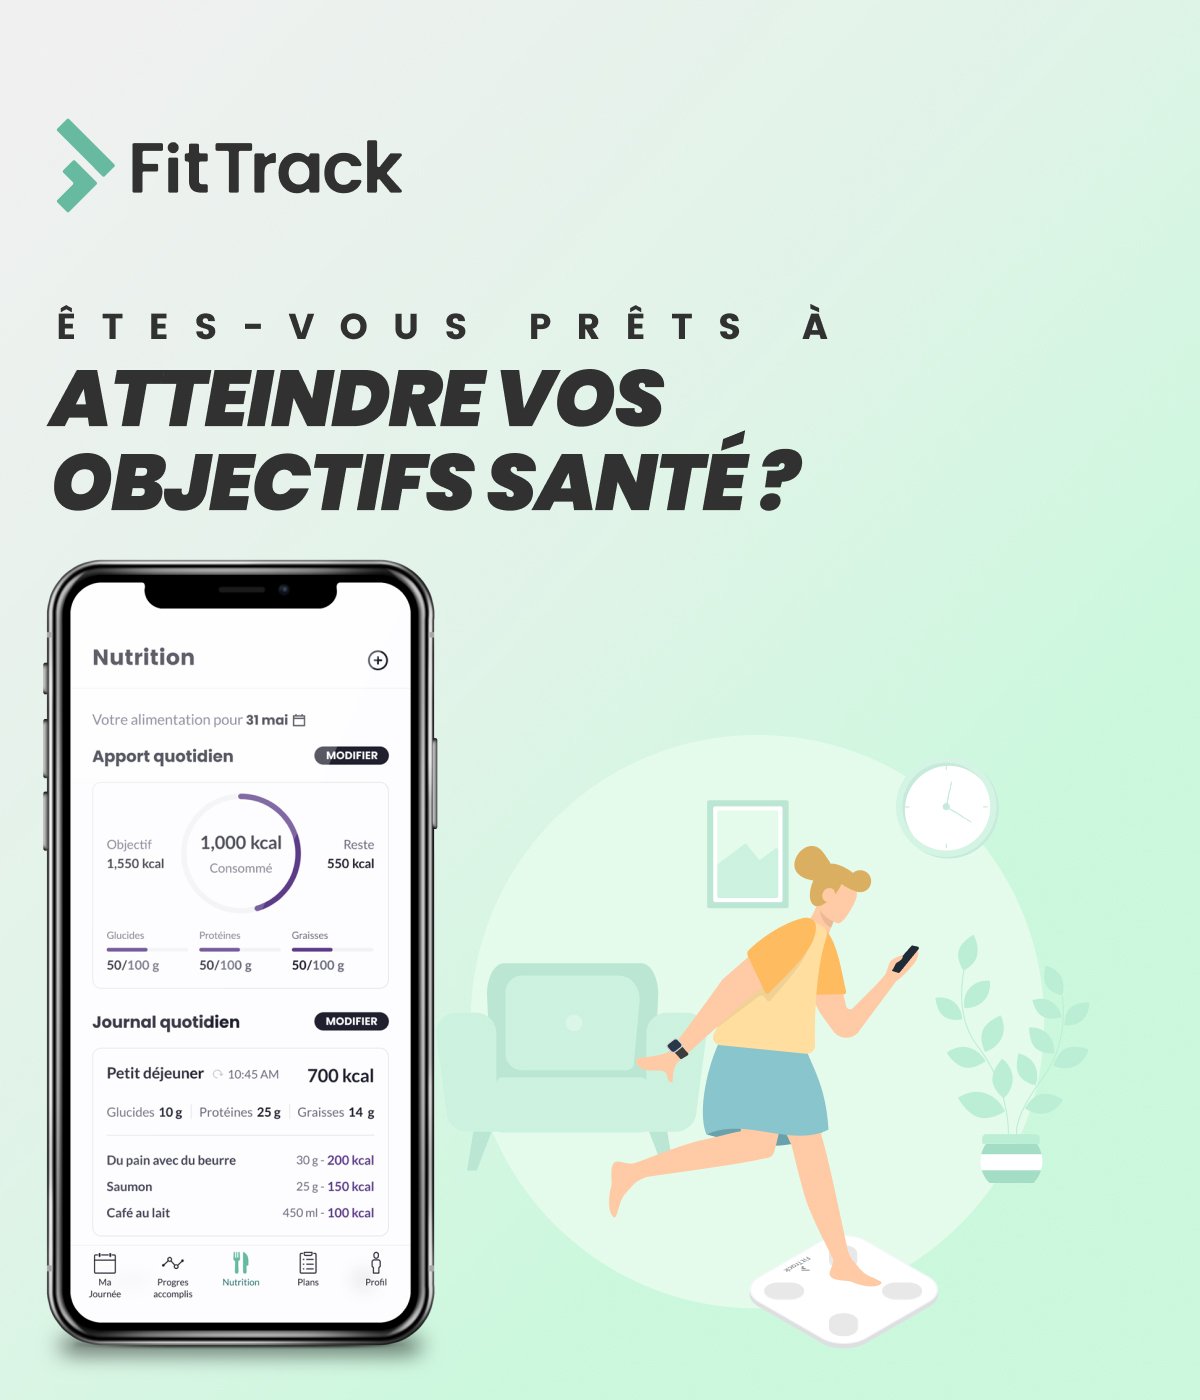 Meet the new FitTrack App